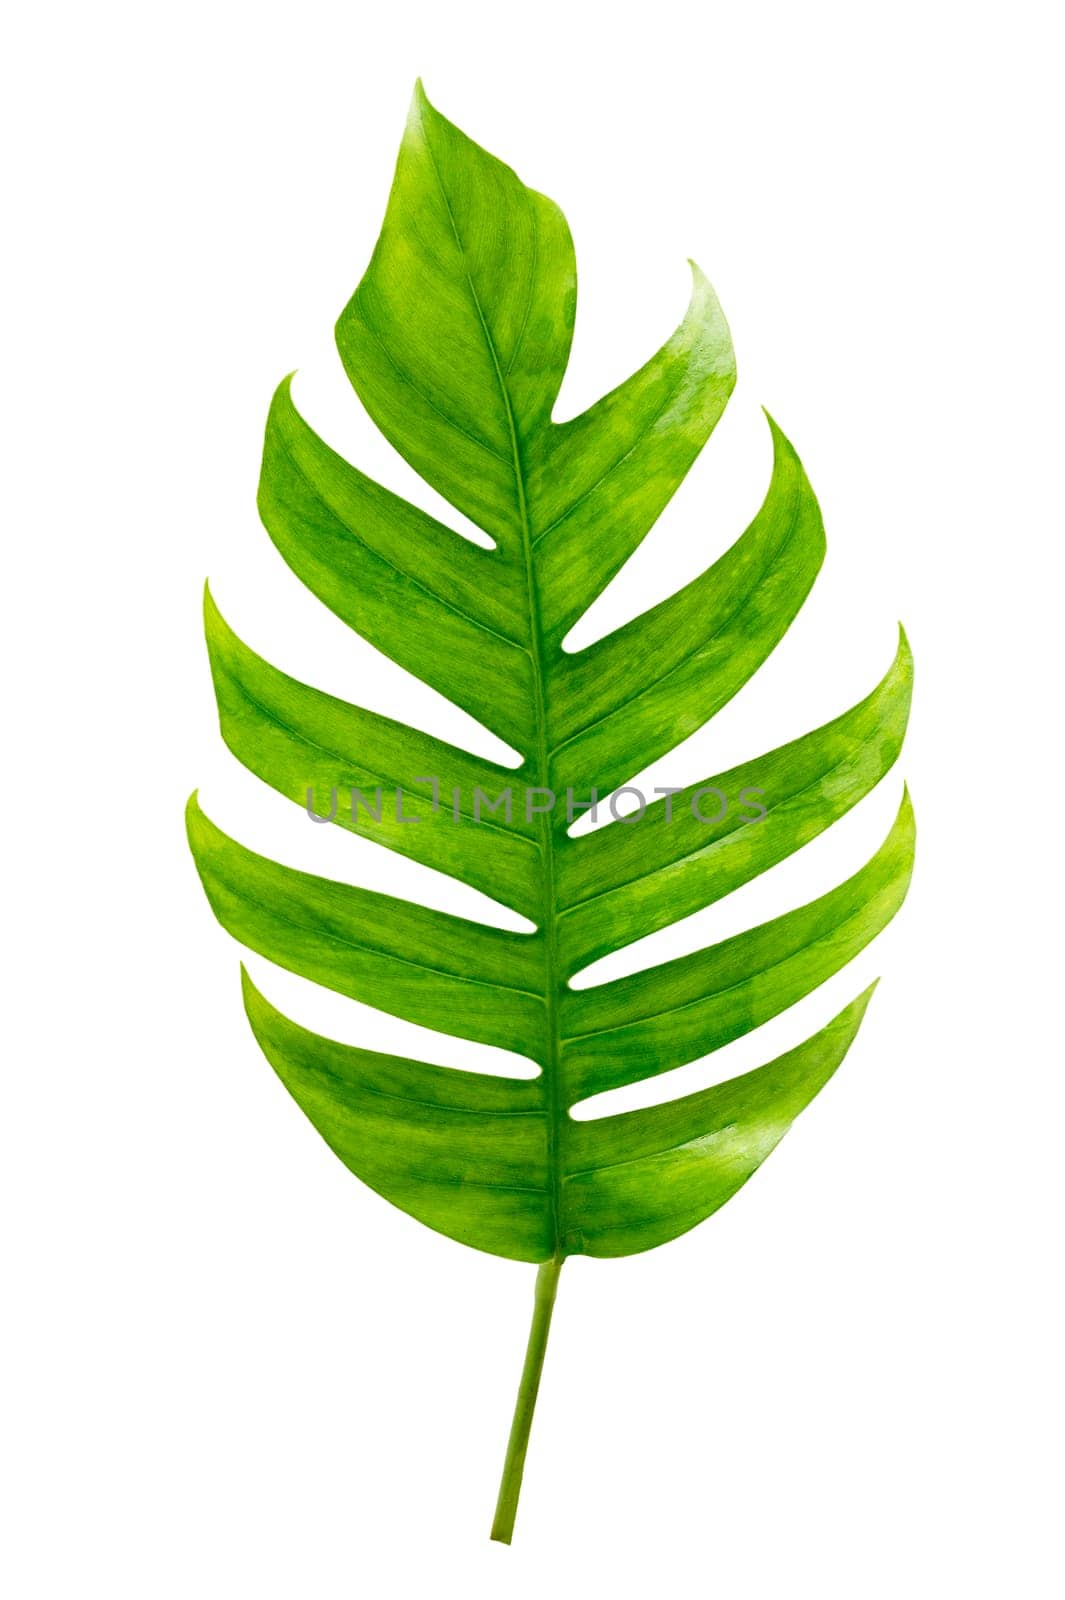 tropical jungle monstera leaves isolated on a white background